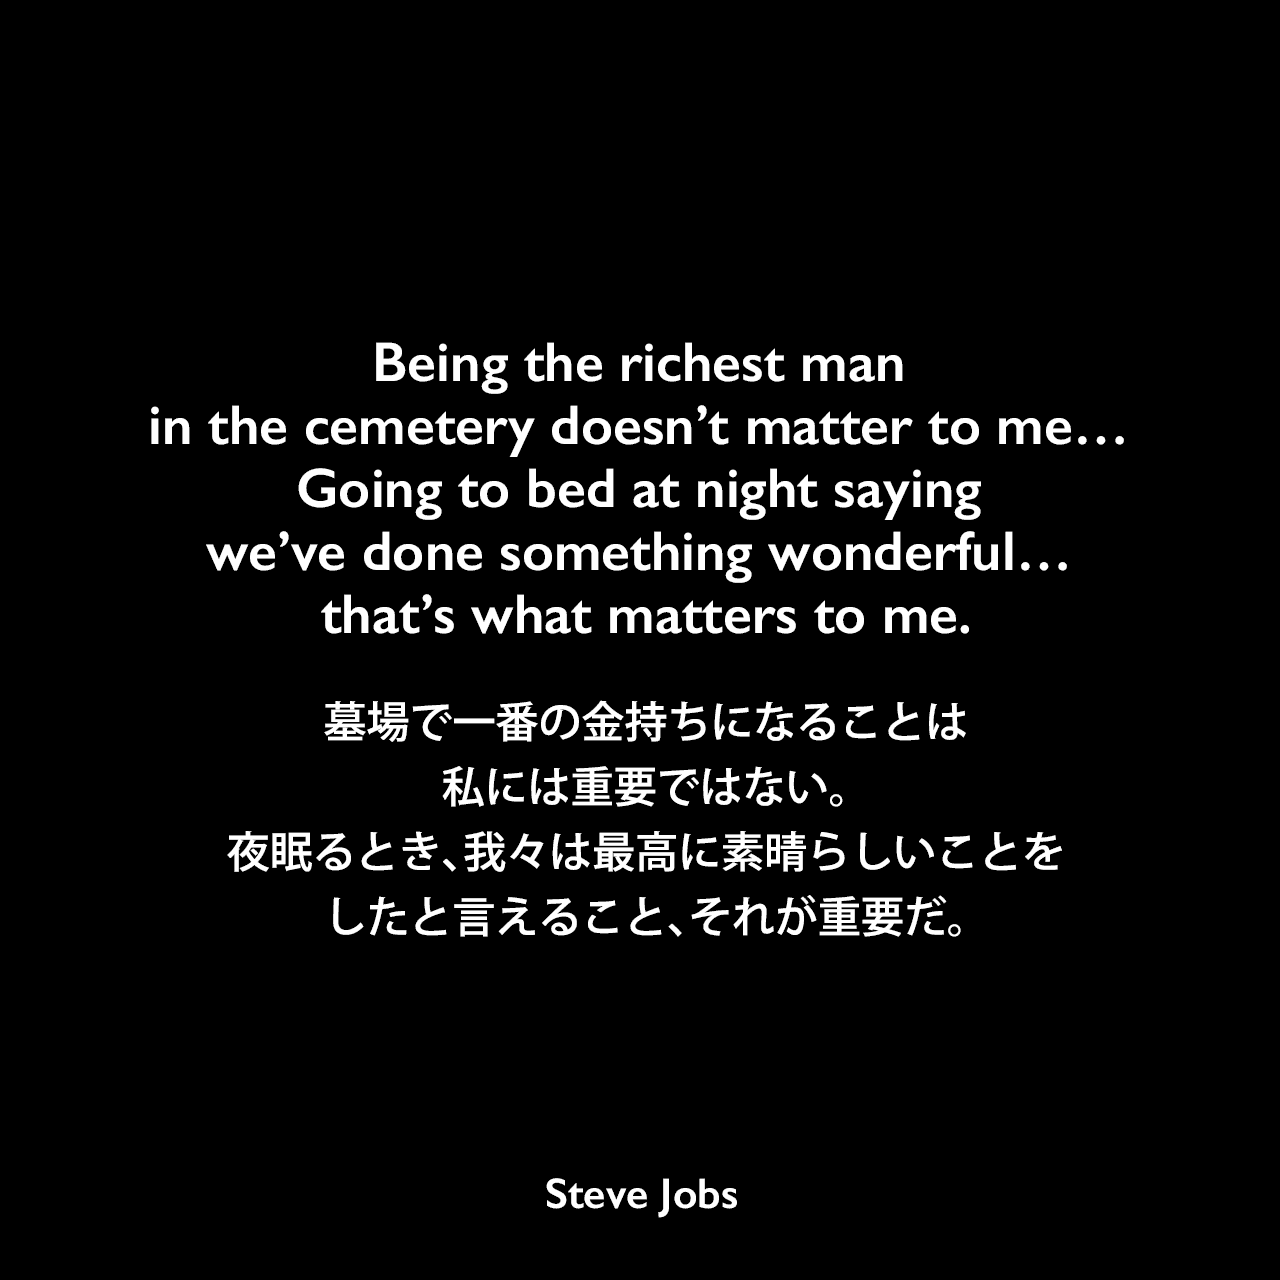 Being the richest man in the cemetery doesn’t matter to me… Going to bed at night saying we’ve done something wonderful… that’s what matters to me.墓場で一番の金持ちになることは私には重要ではない。夜眠るとき、我々は最高に素晴らしいことをしたと言えること、それが重要だ。- 1993年 ビル・ゲイツとマイクロソフトの成功について The Wall Street JournalでのコメントよりSteve Jobs